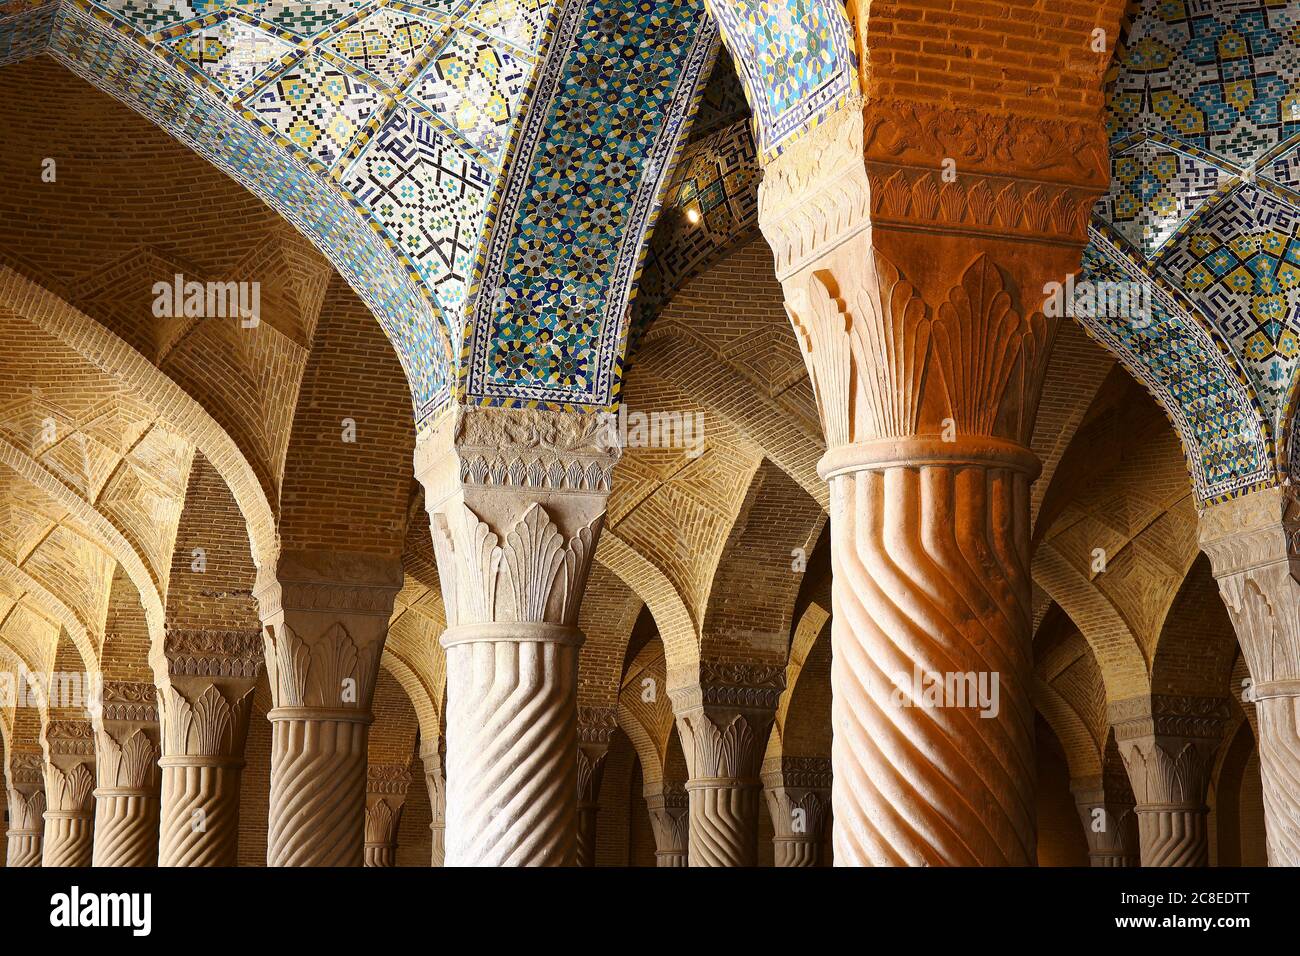 Iran, Fars Province, Shiraz, Columns and ribbed vaulting of Vakil Mosque Stock Photo